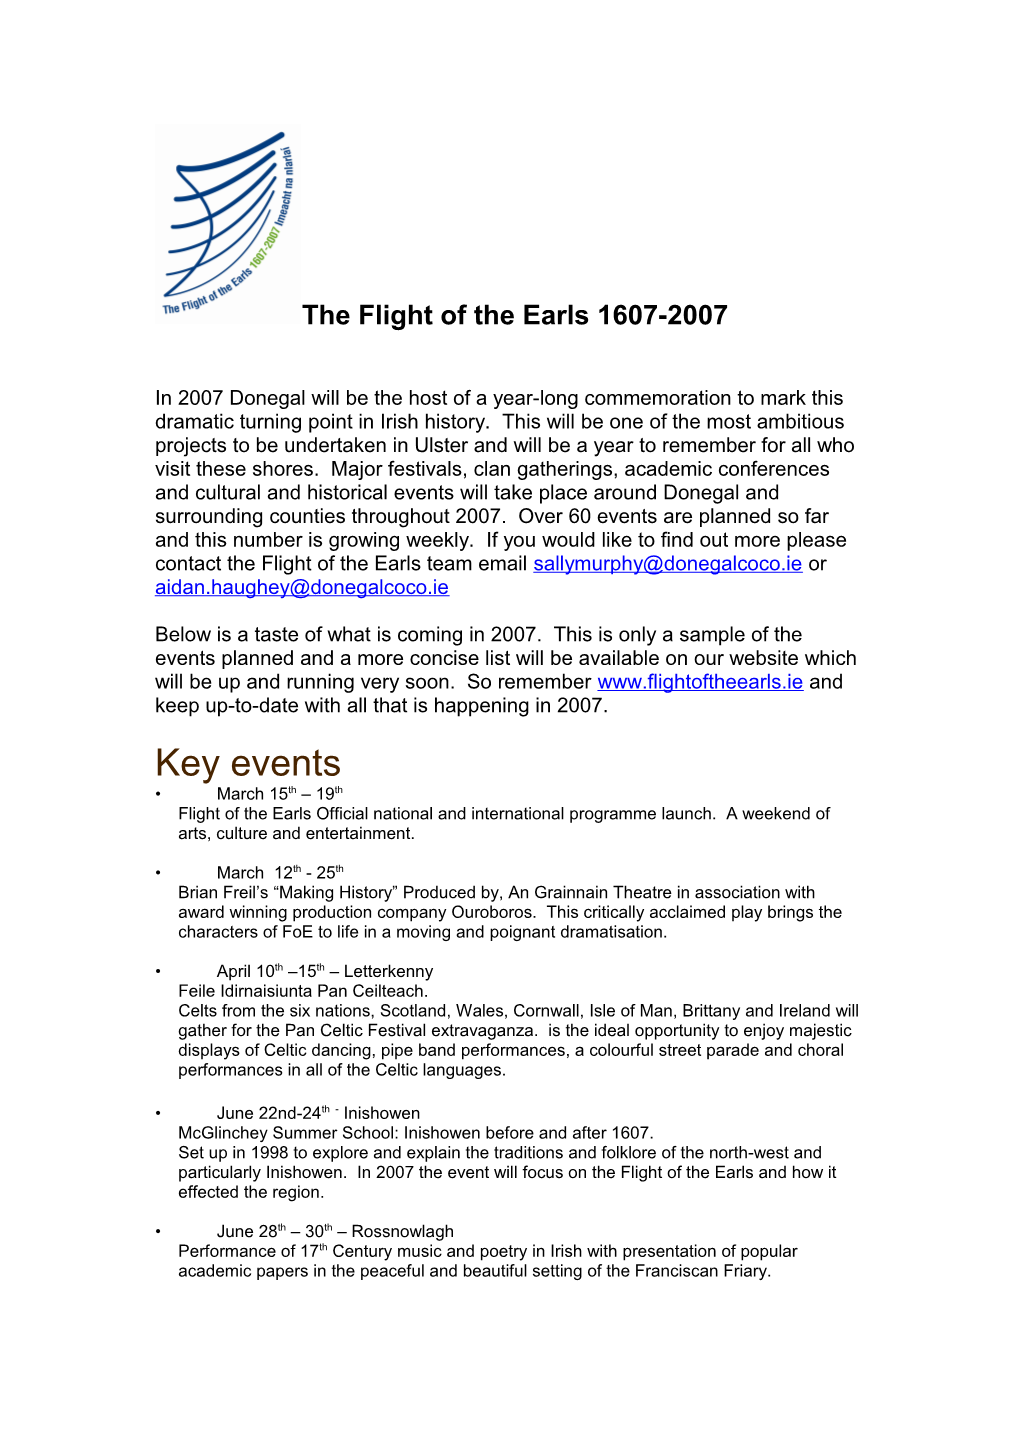 The Flight of the Earls 1607-2007